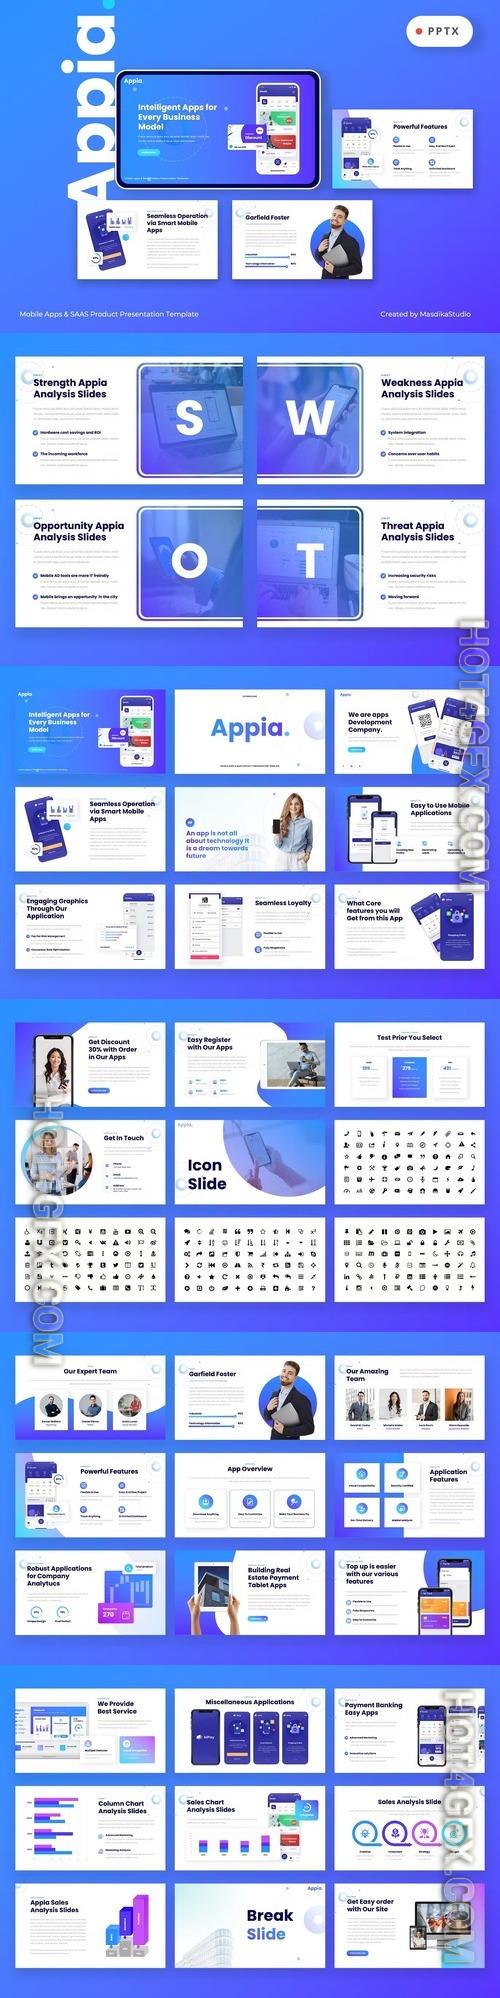 APPIA - Mobile Apps & SAAS Powerpoint Template